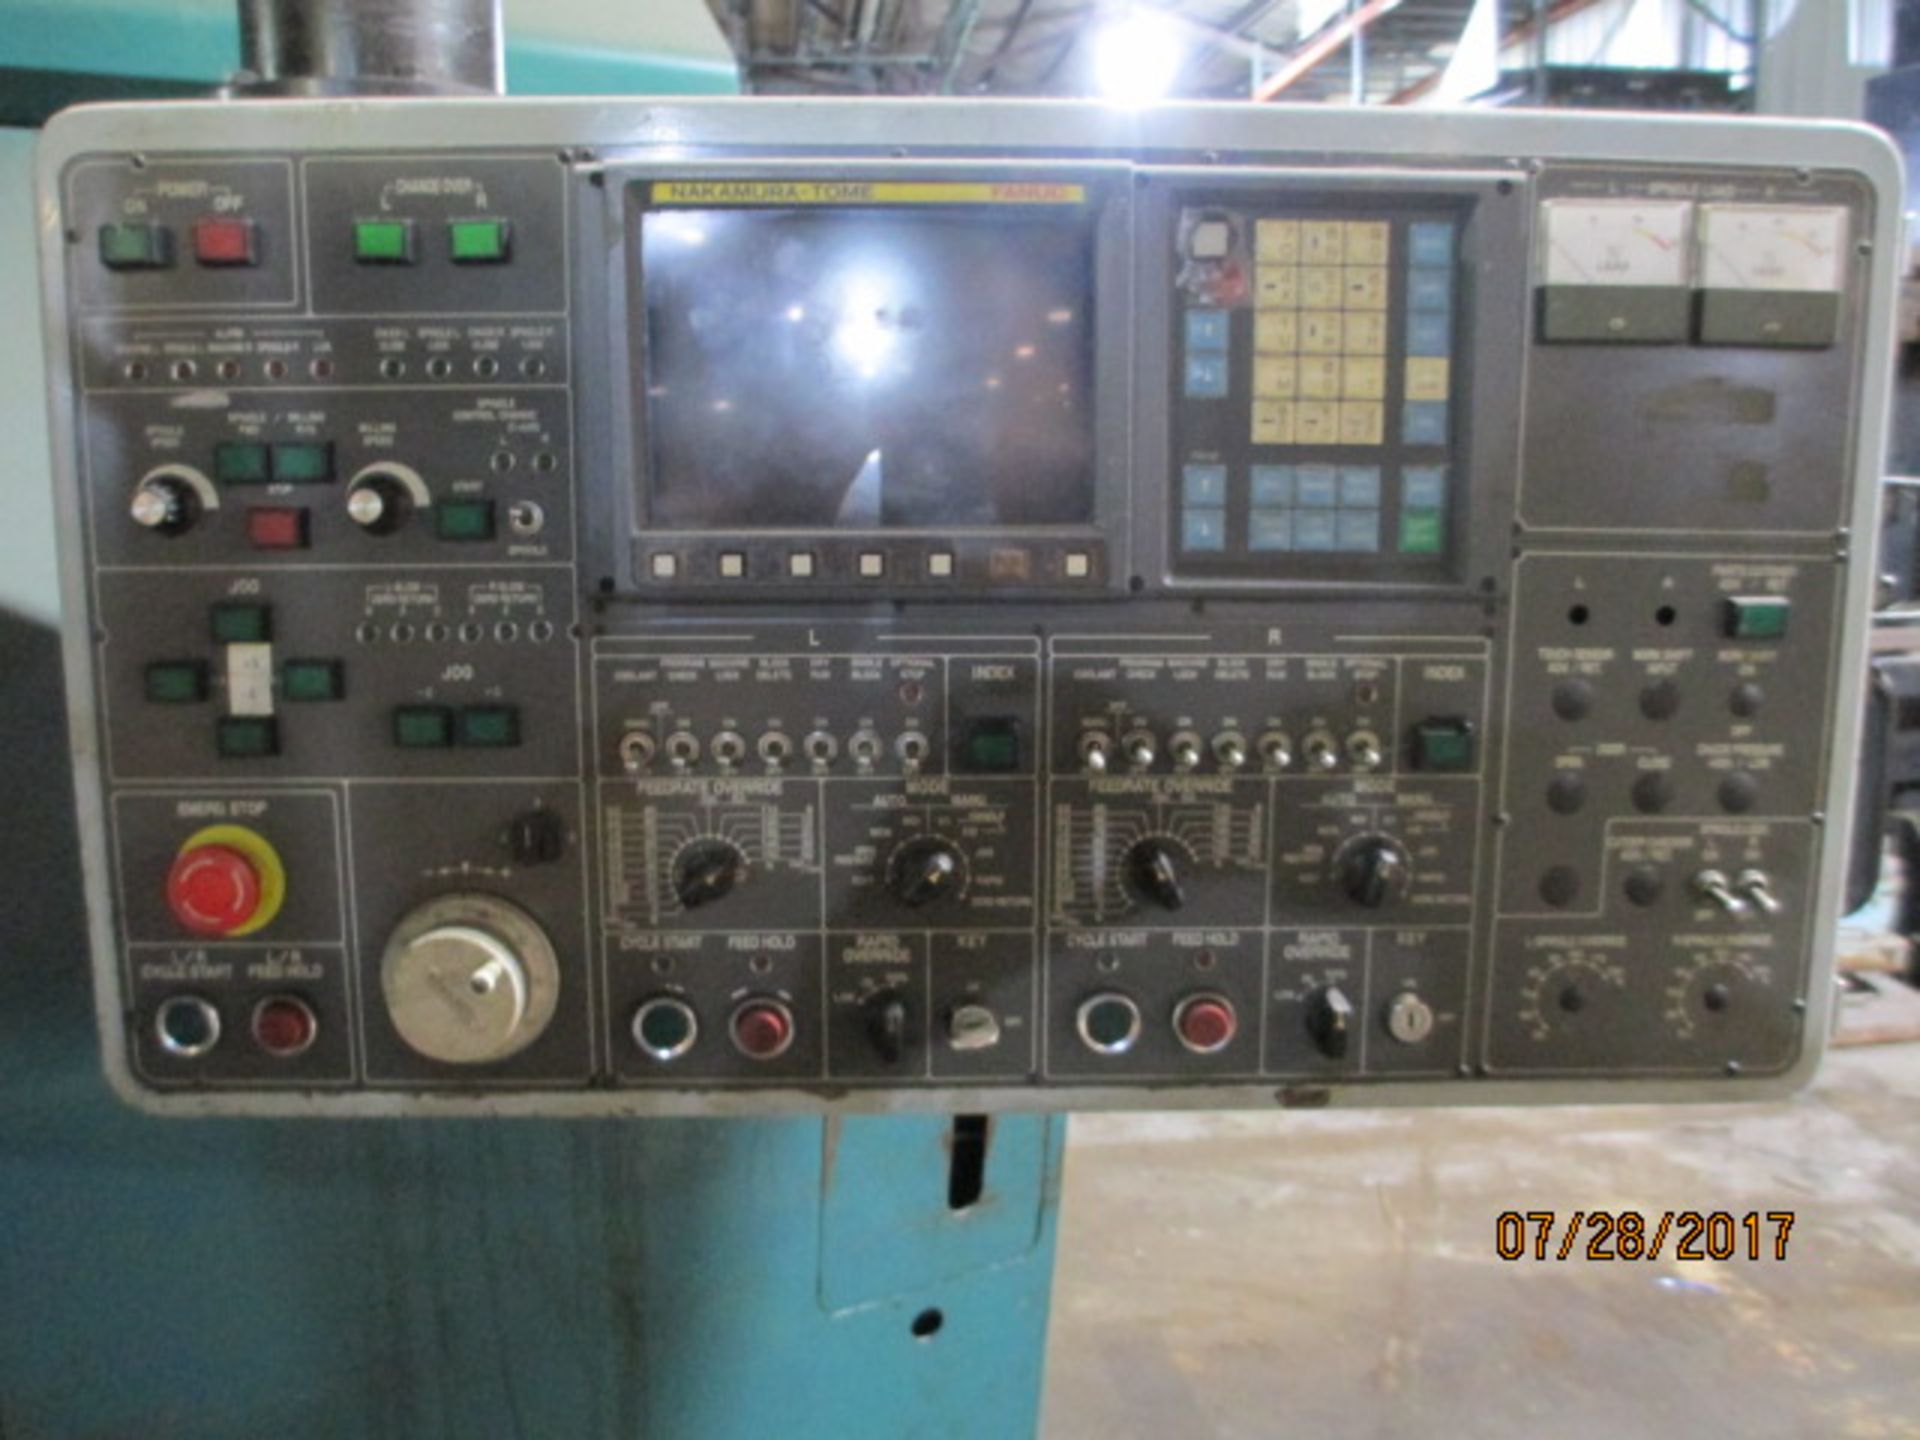 Nakamura Tome Model TW-30 2-Axis Twin Spindle Turning Center - Dryden, MI - Image 3 of 3